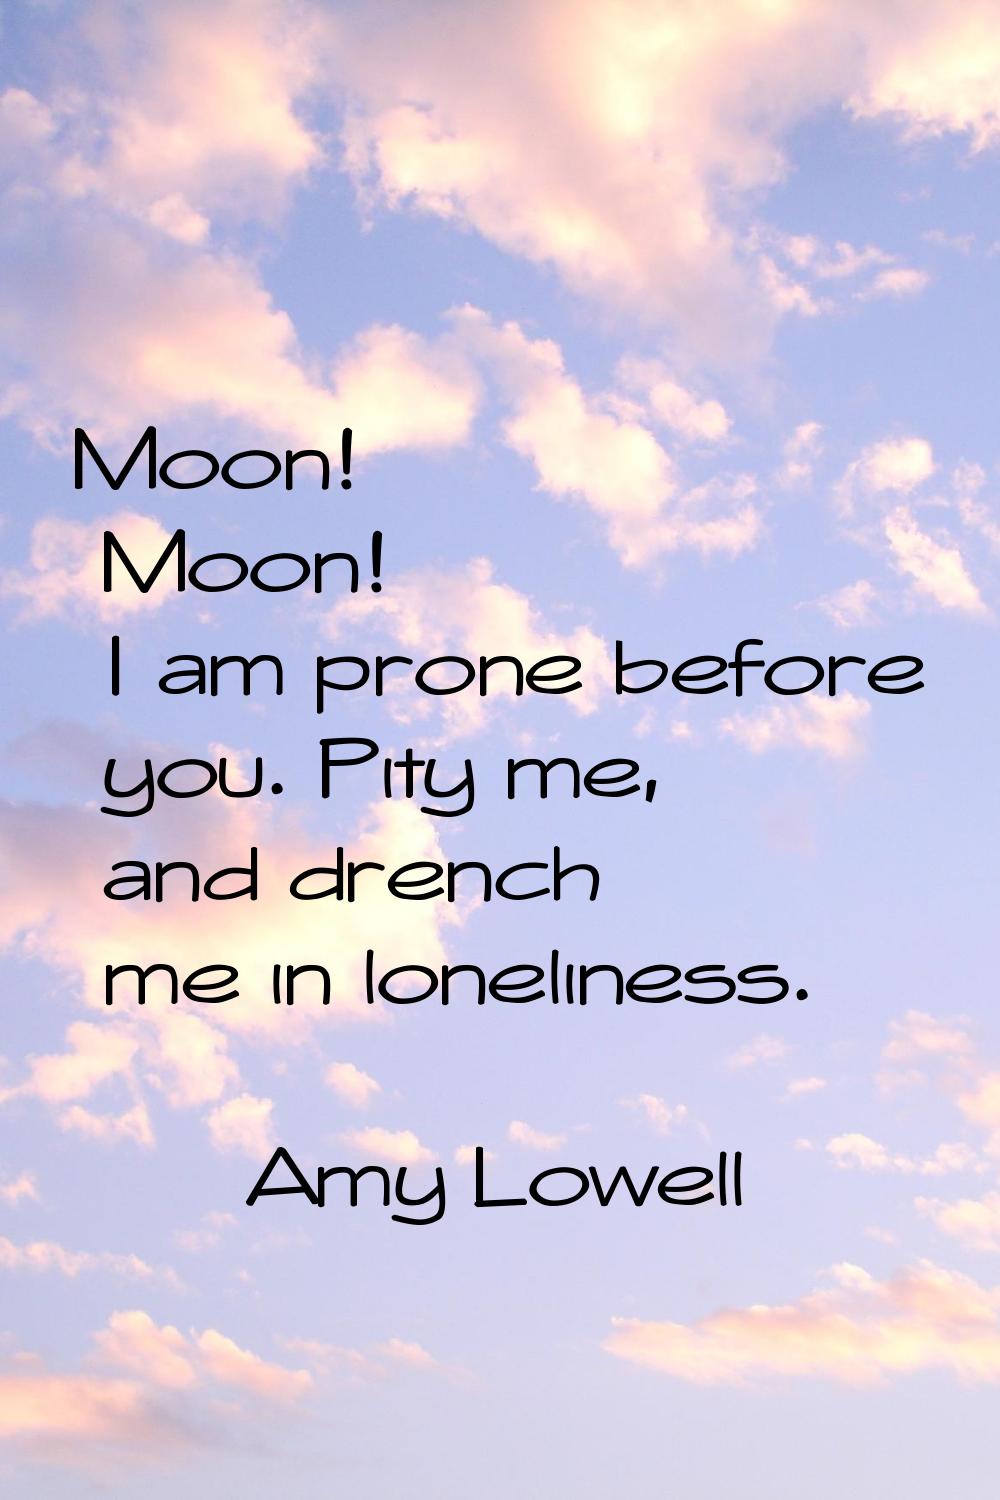 Moon! Moon! I am prone before you. Pity me, and drench me in loneliness.